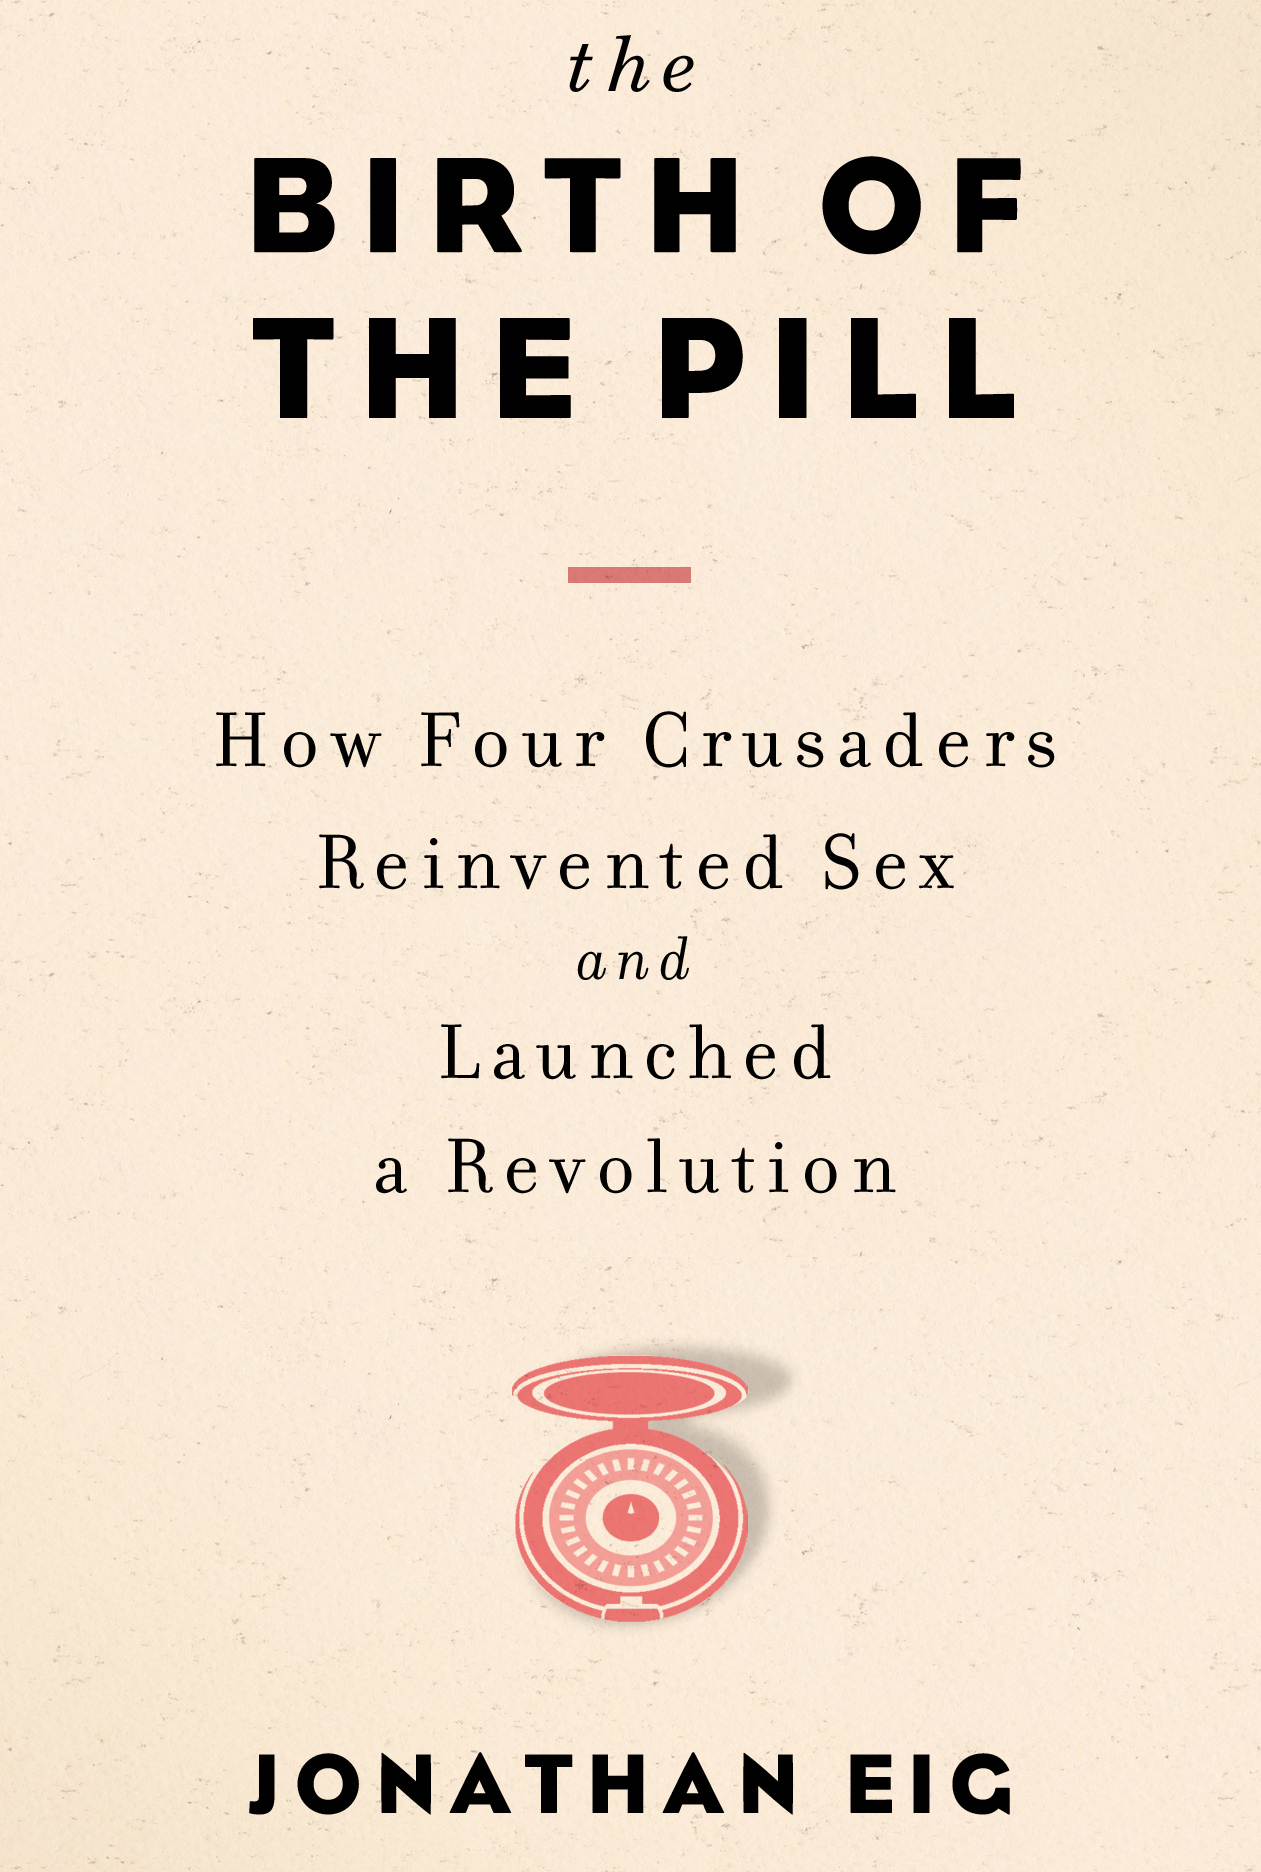 TWC Birth of the Pill - Teen World Confidential